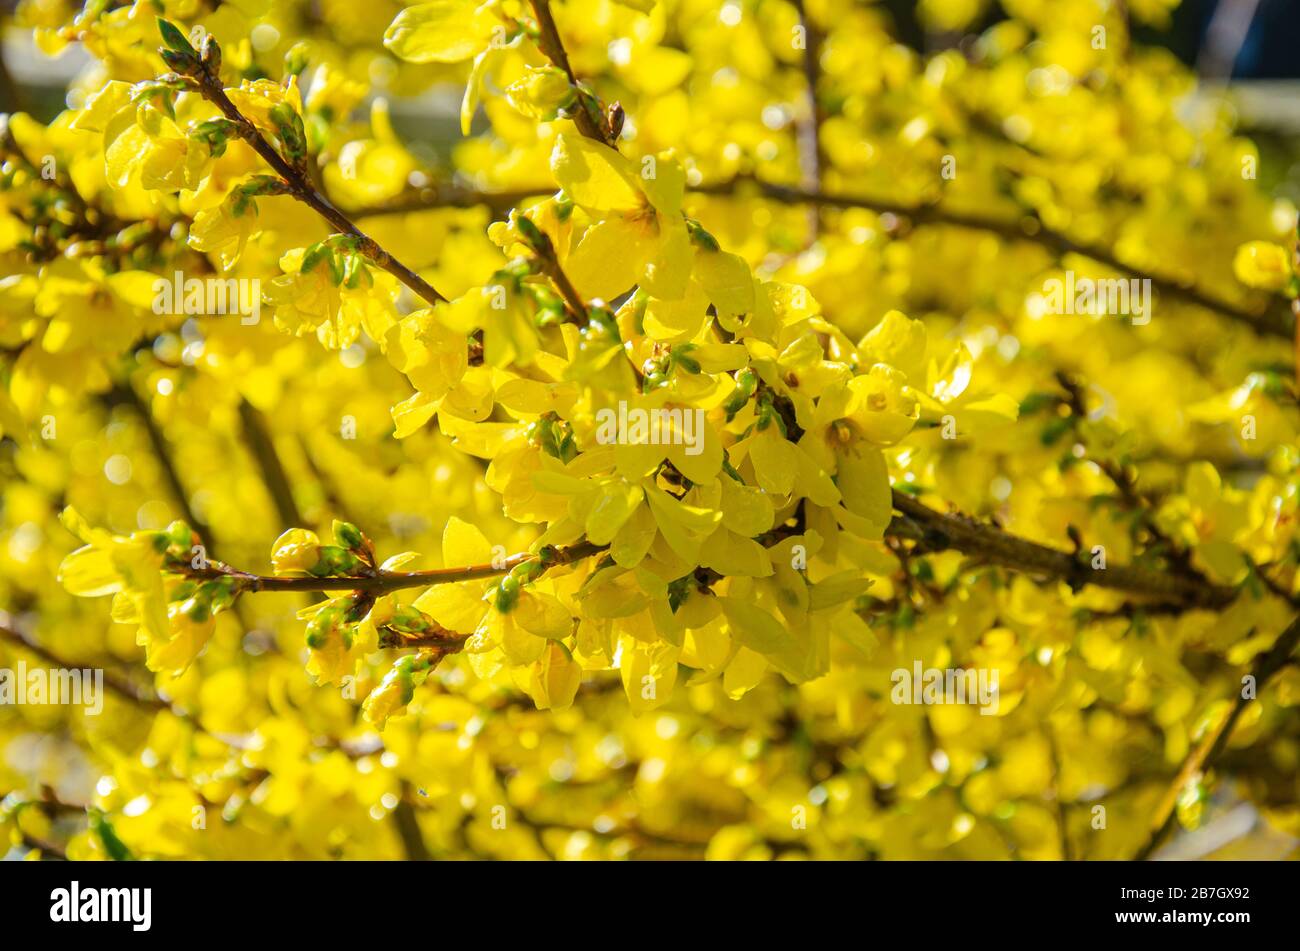 Forsythia is a spring flowering shrub with yellow flowers. Stock Photo